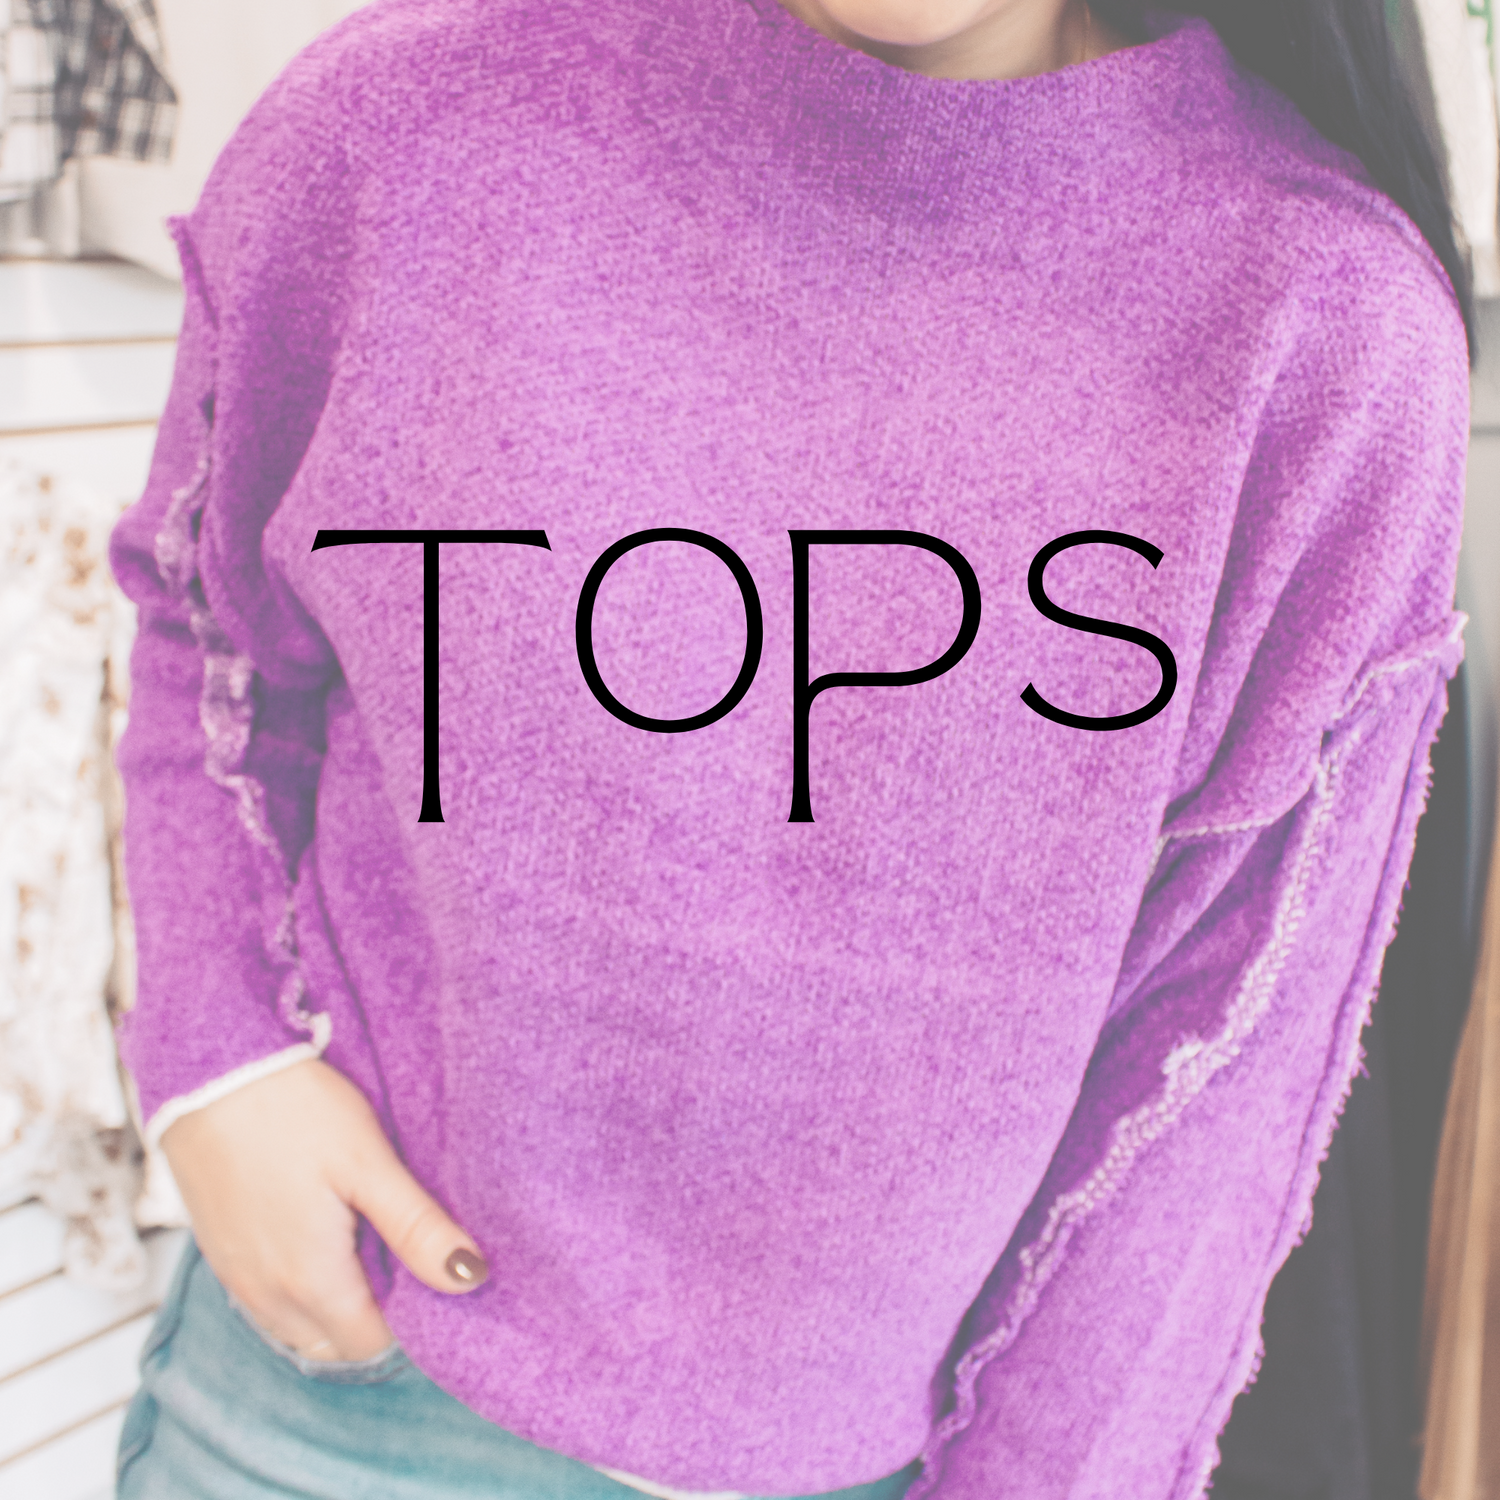 All Tops